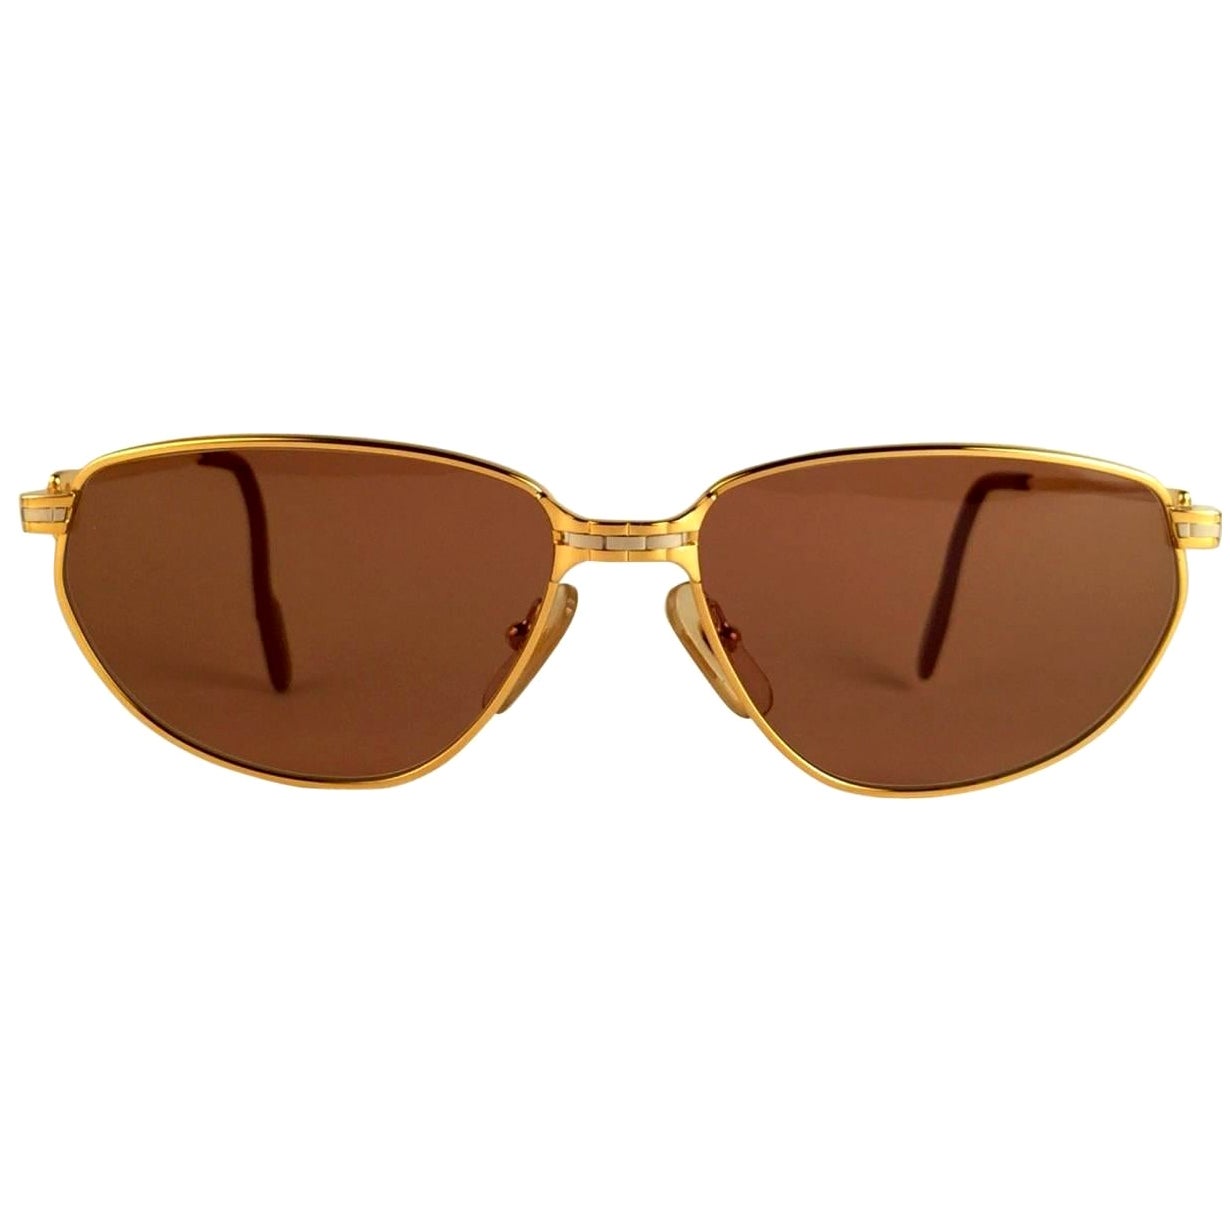 New 1988 Cartier Panthere Windsor Sunglasses with spotless brown(uv protection) lenses. The cat's eye frame is with the front and sides in yellow and white gold. All hallmarks. Red enamel ear paddles. 
Both arms sport the C from Cartier on the